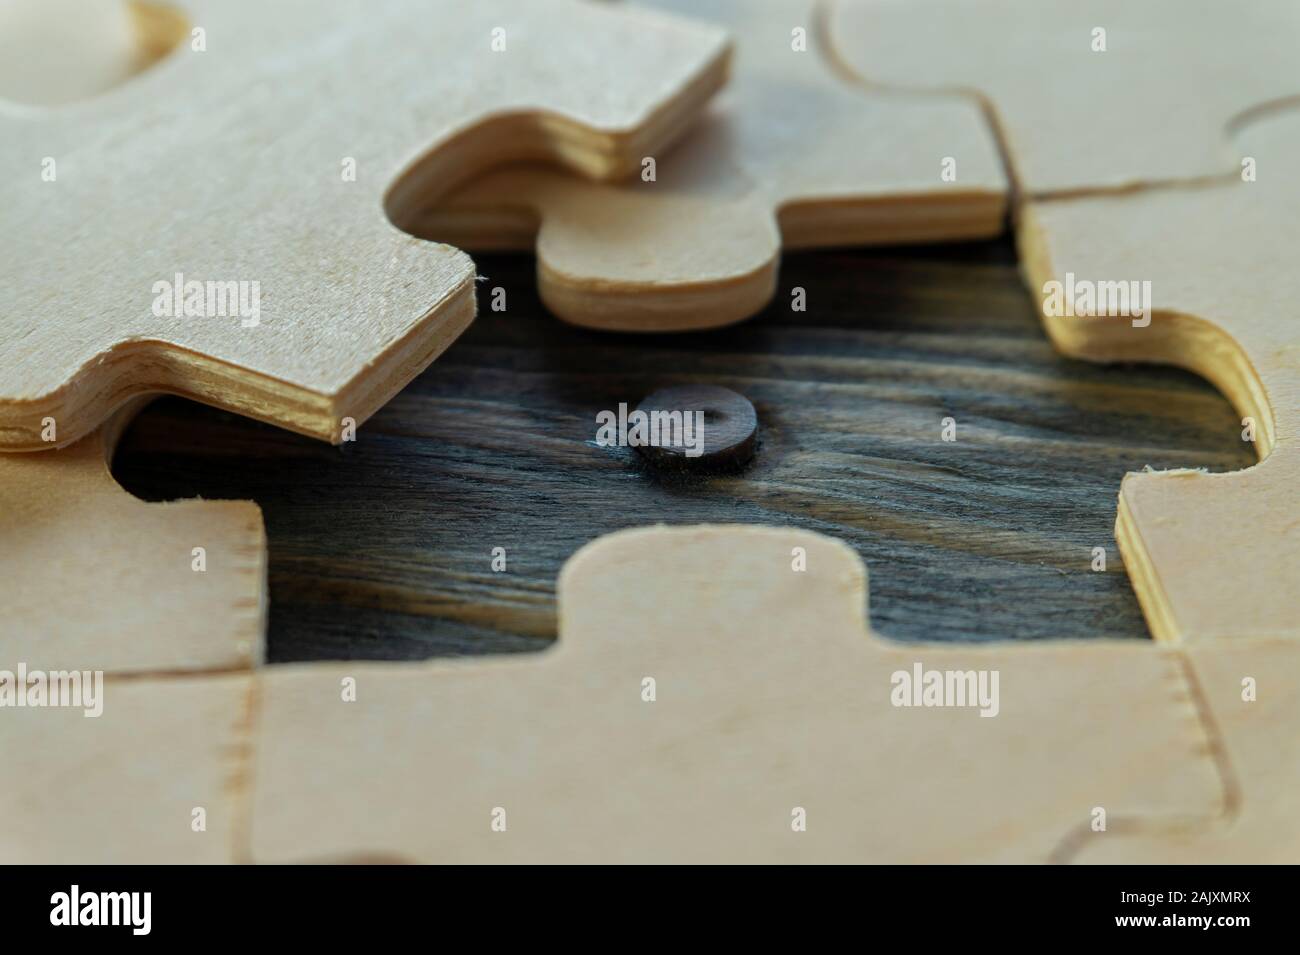 Close-up on unpainted plywood puzzles with one piece taken out, showing  wooden surface underneath, problem solving and teamwork concept Stock Photo  - Alamy